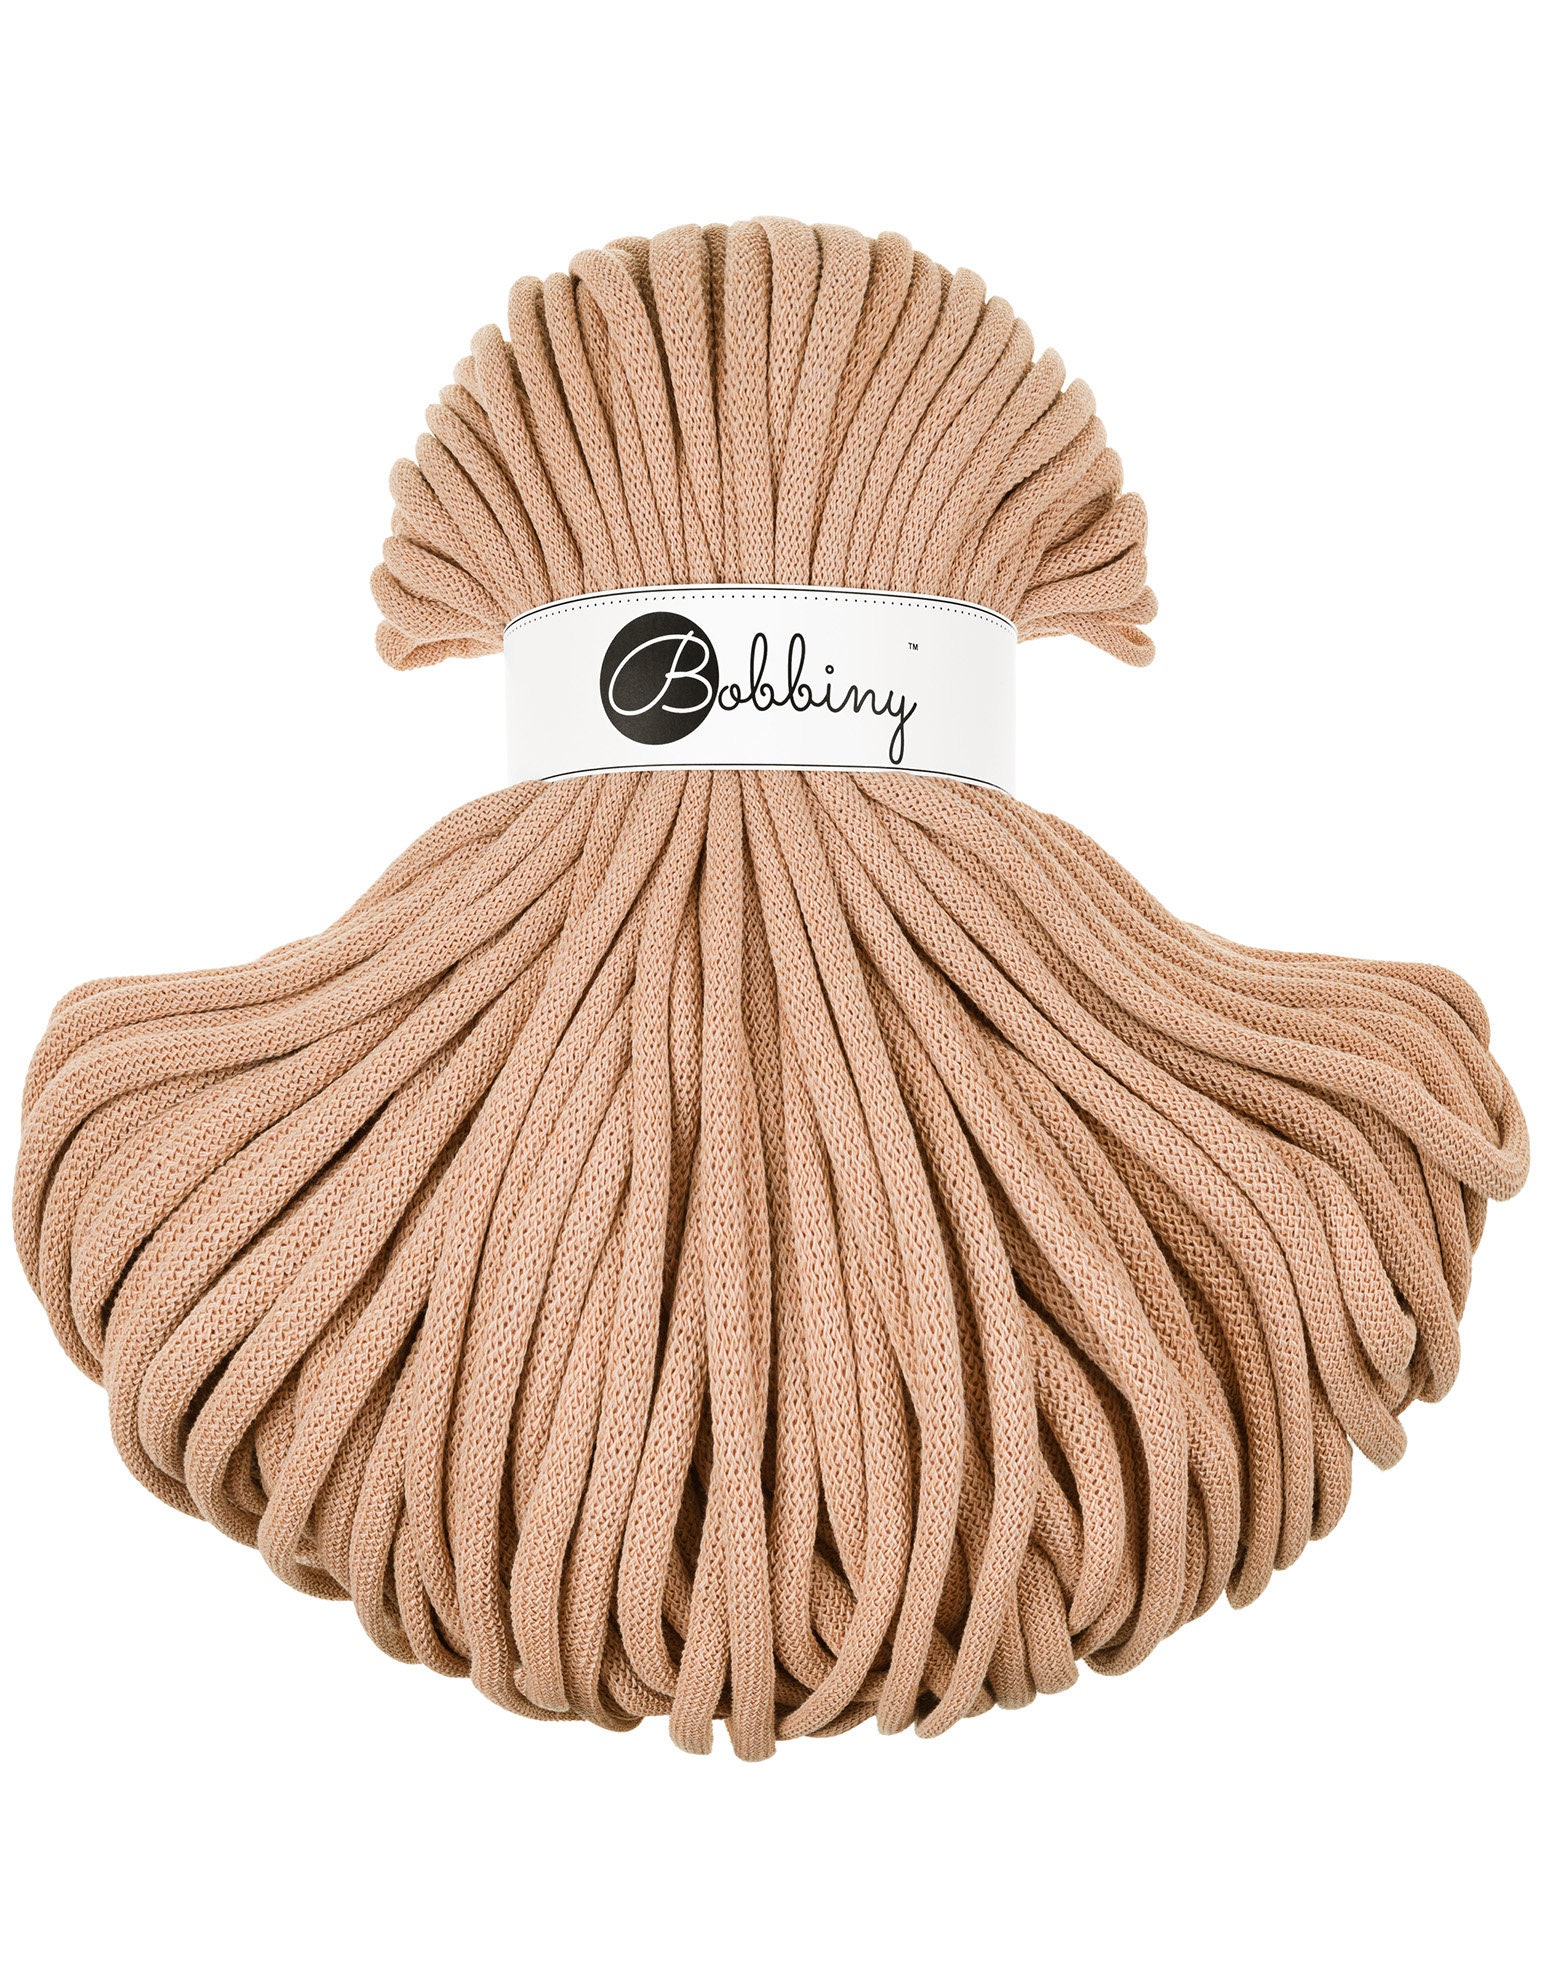 Bobbiny Biscuit Cotton Cord 9mm, 108 yards (100 meters) - Braided cotton  cord, certified recycled cotton cord